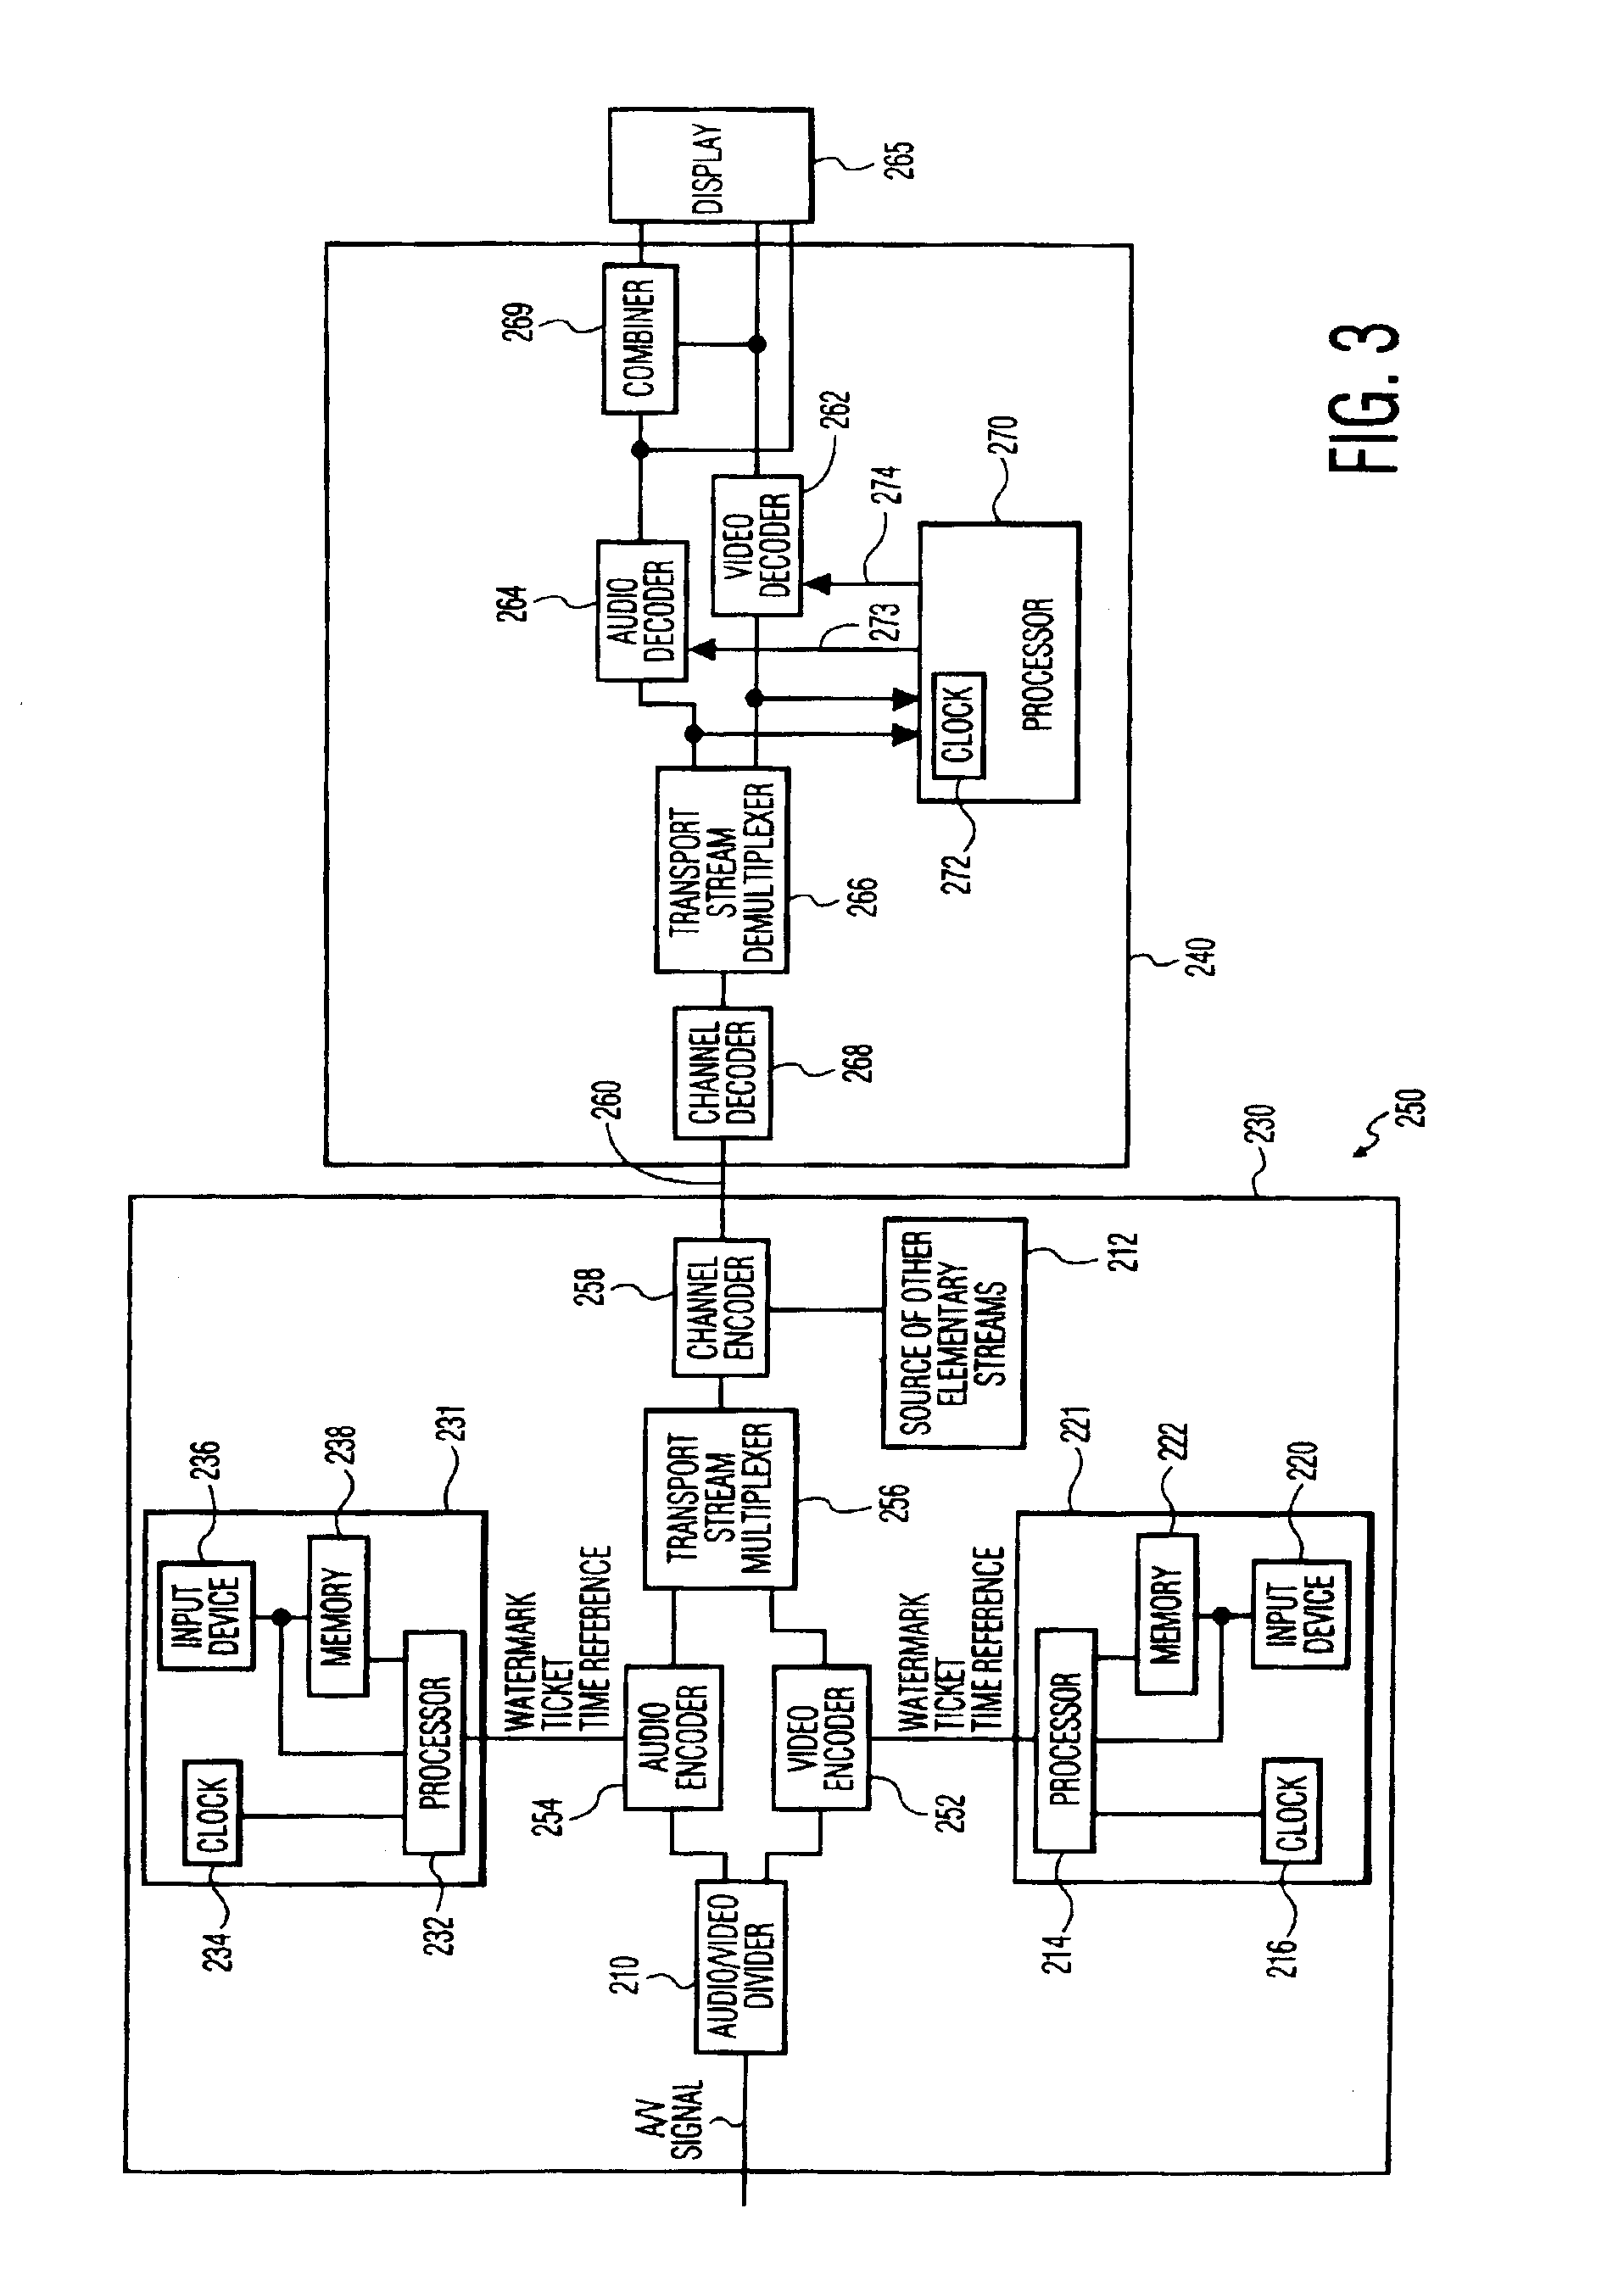 Method and apparatus for use of a time-dependent watermark for the purpose of copy protection